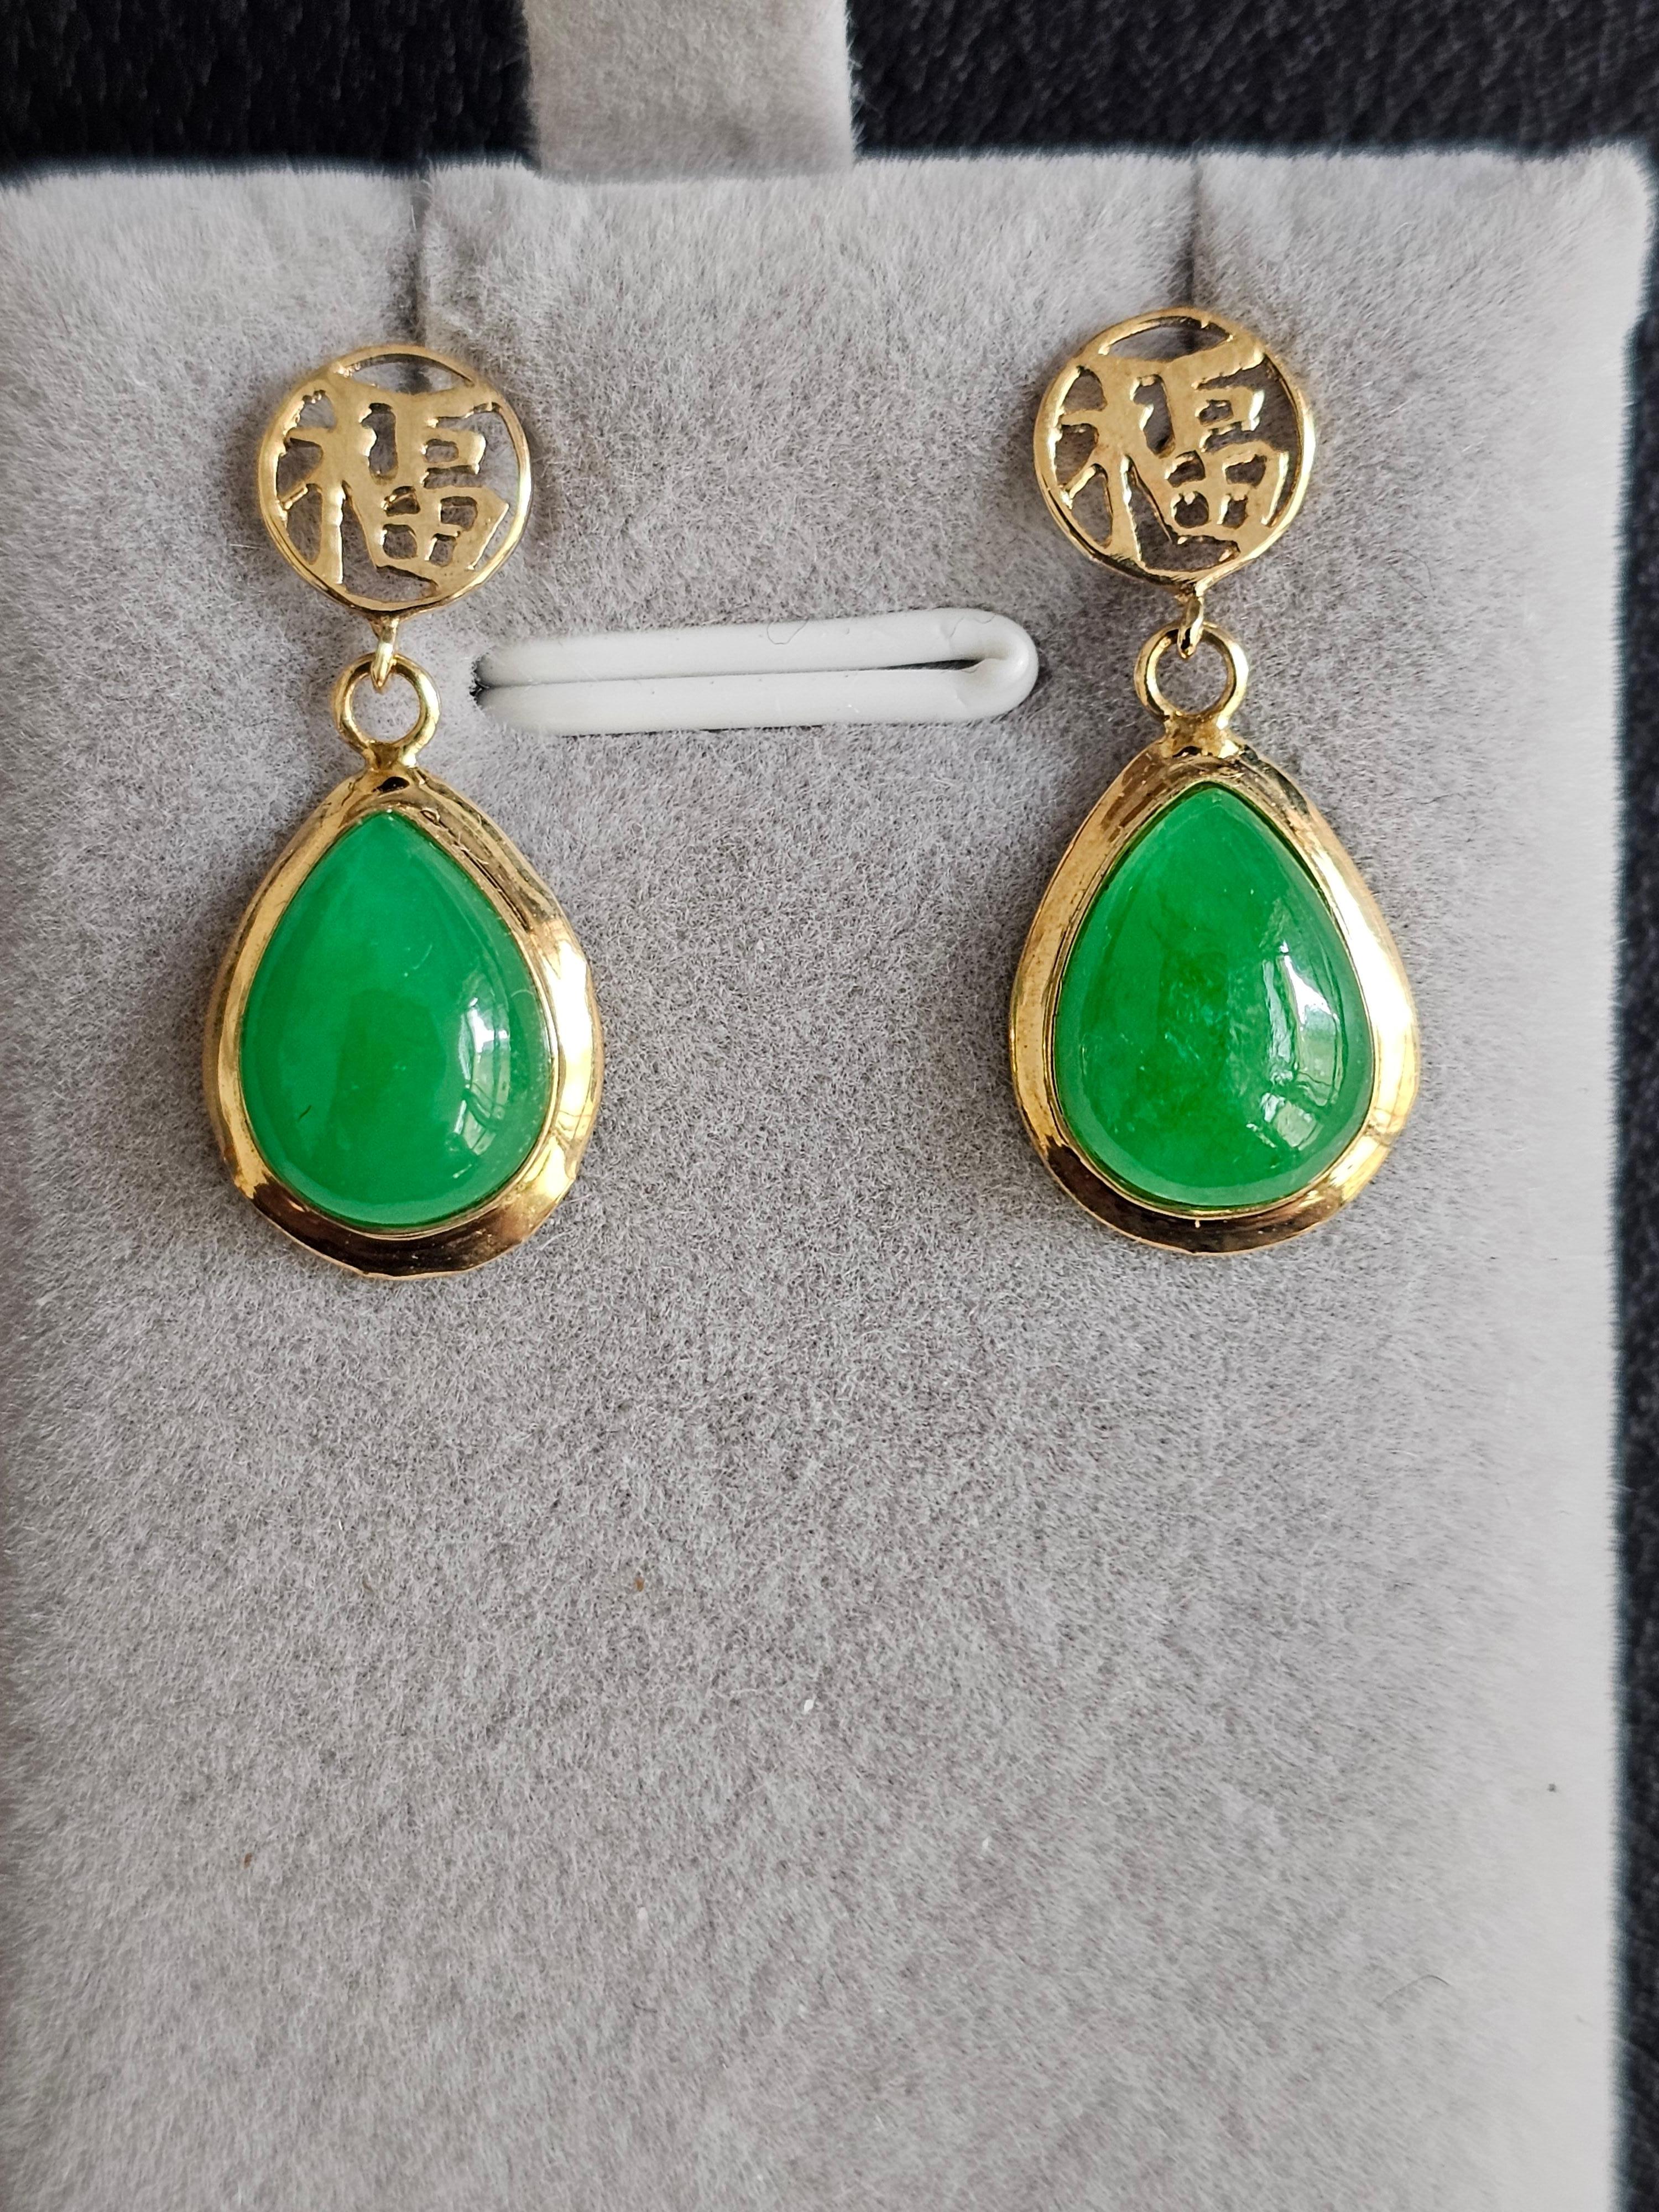 Fortune Drop Green Jade Earrings With 14K Solid Yellow Gold symbol.

The 'Fu Fuku Fortune Jade Earrings' symbolize courage and prosperity. Where the Han character 'Fu' (Mandarin) and 'Fuku' (Japanese) ties in these earrings to the clip, it dangles